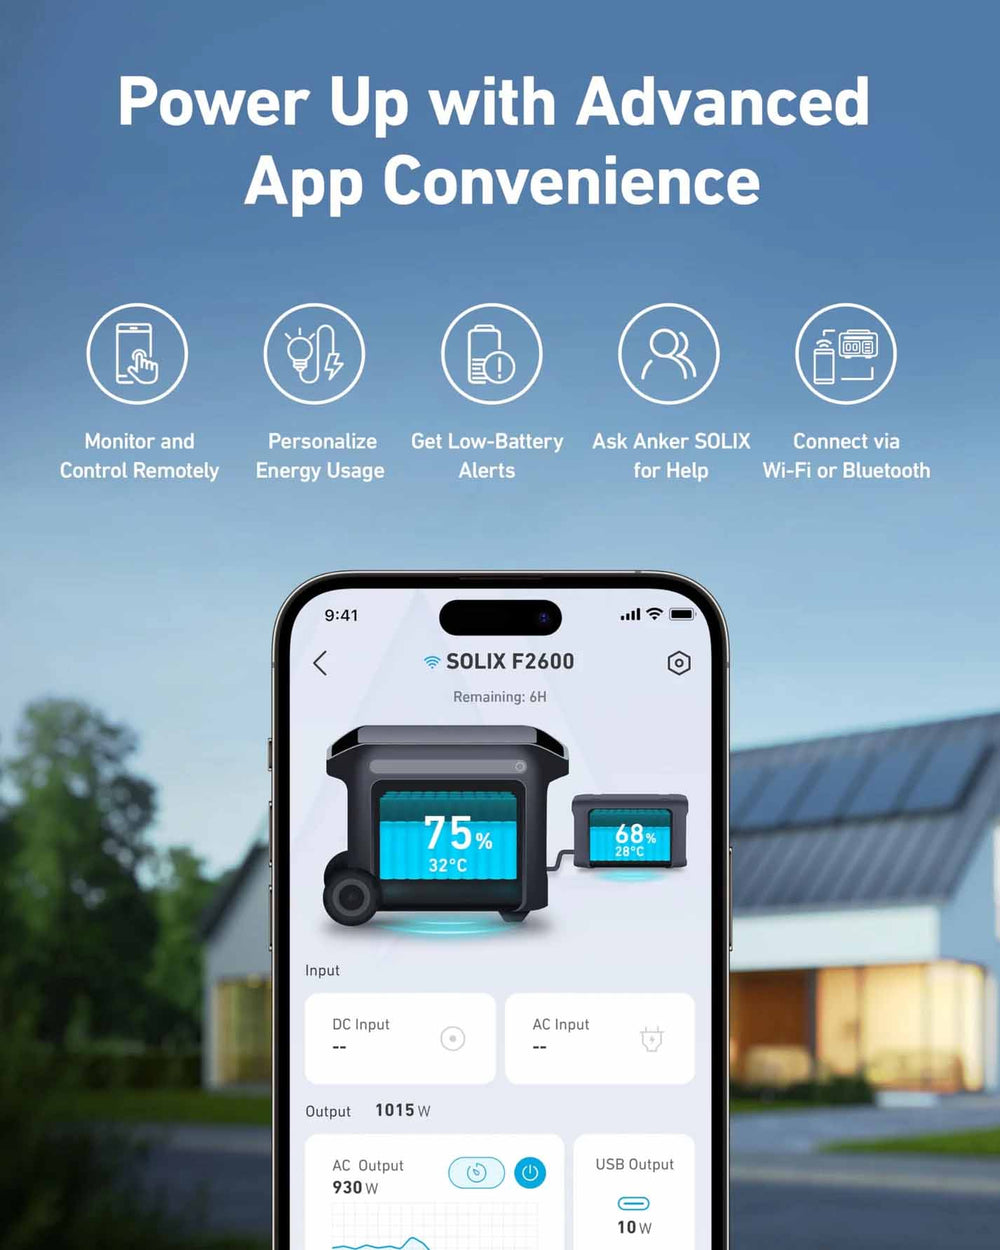 Connect Your SOLIX F2600 With The Anker App